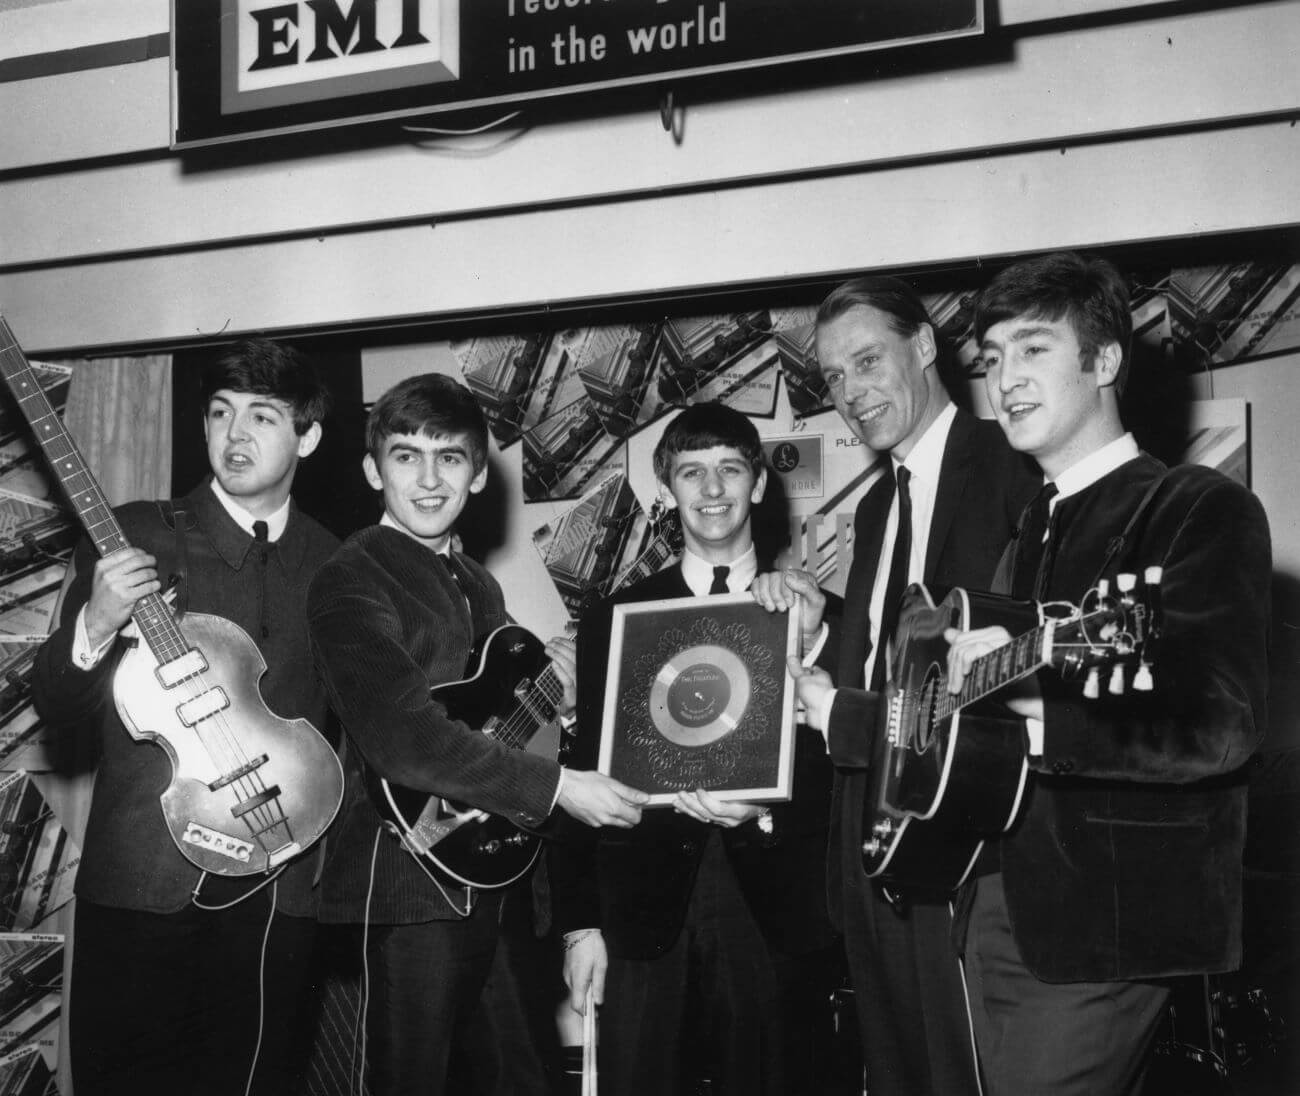 A black and white picture of Paul McCartney, George Harrison, and John Lennon holding guitars and Ringo Starr holding a record. George Martin poses with them.